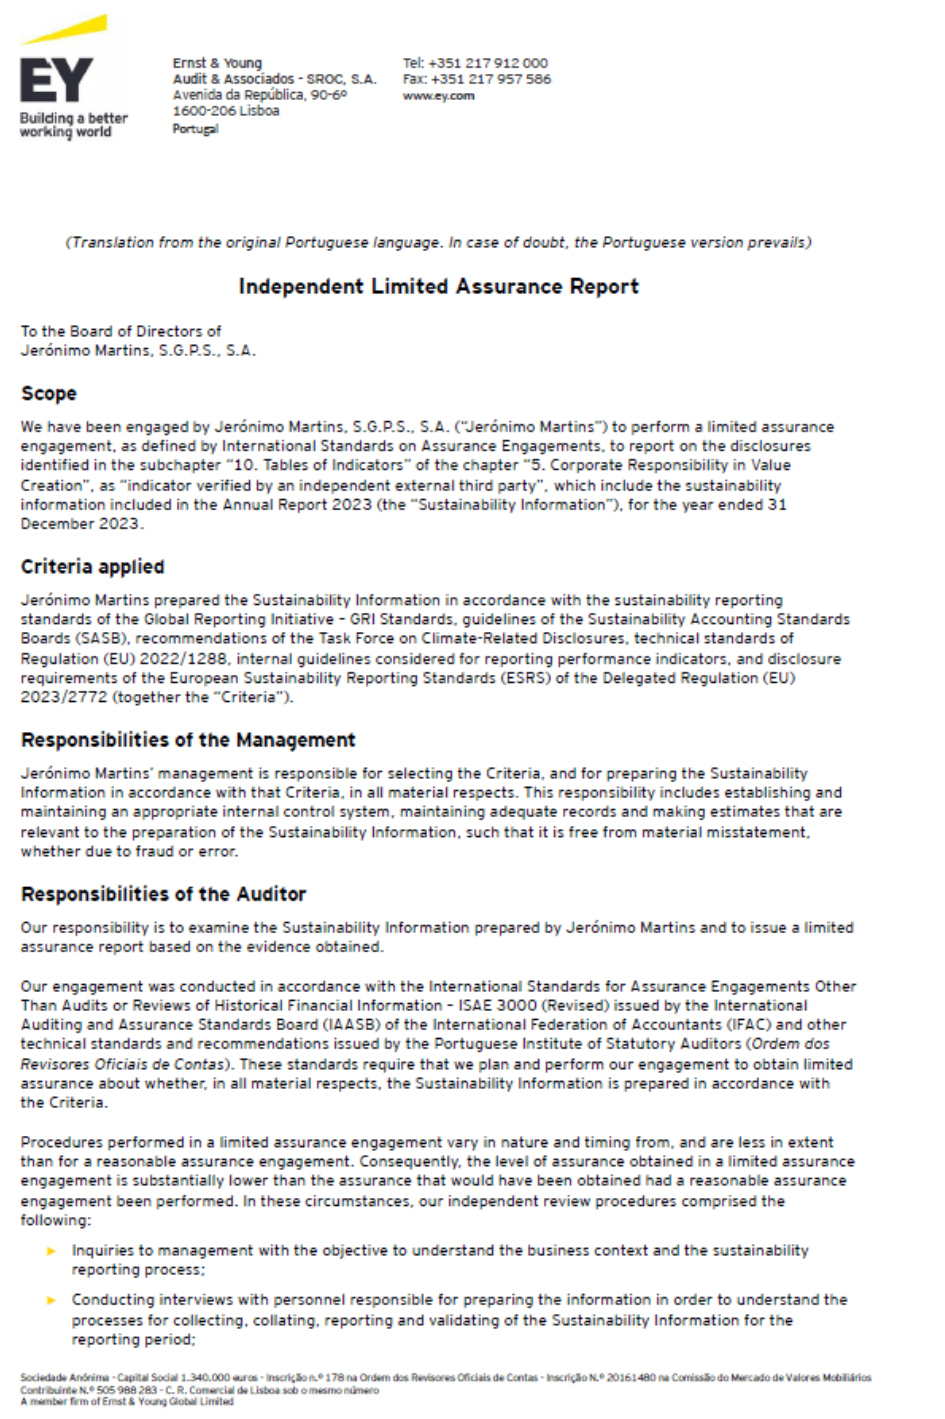 Page 1 of the independent limited assurance report (photo)